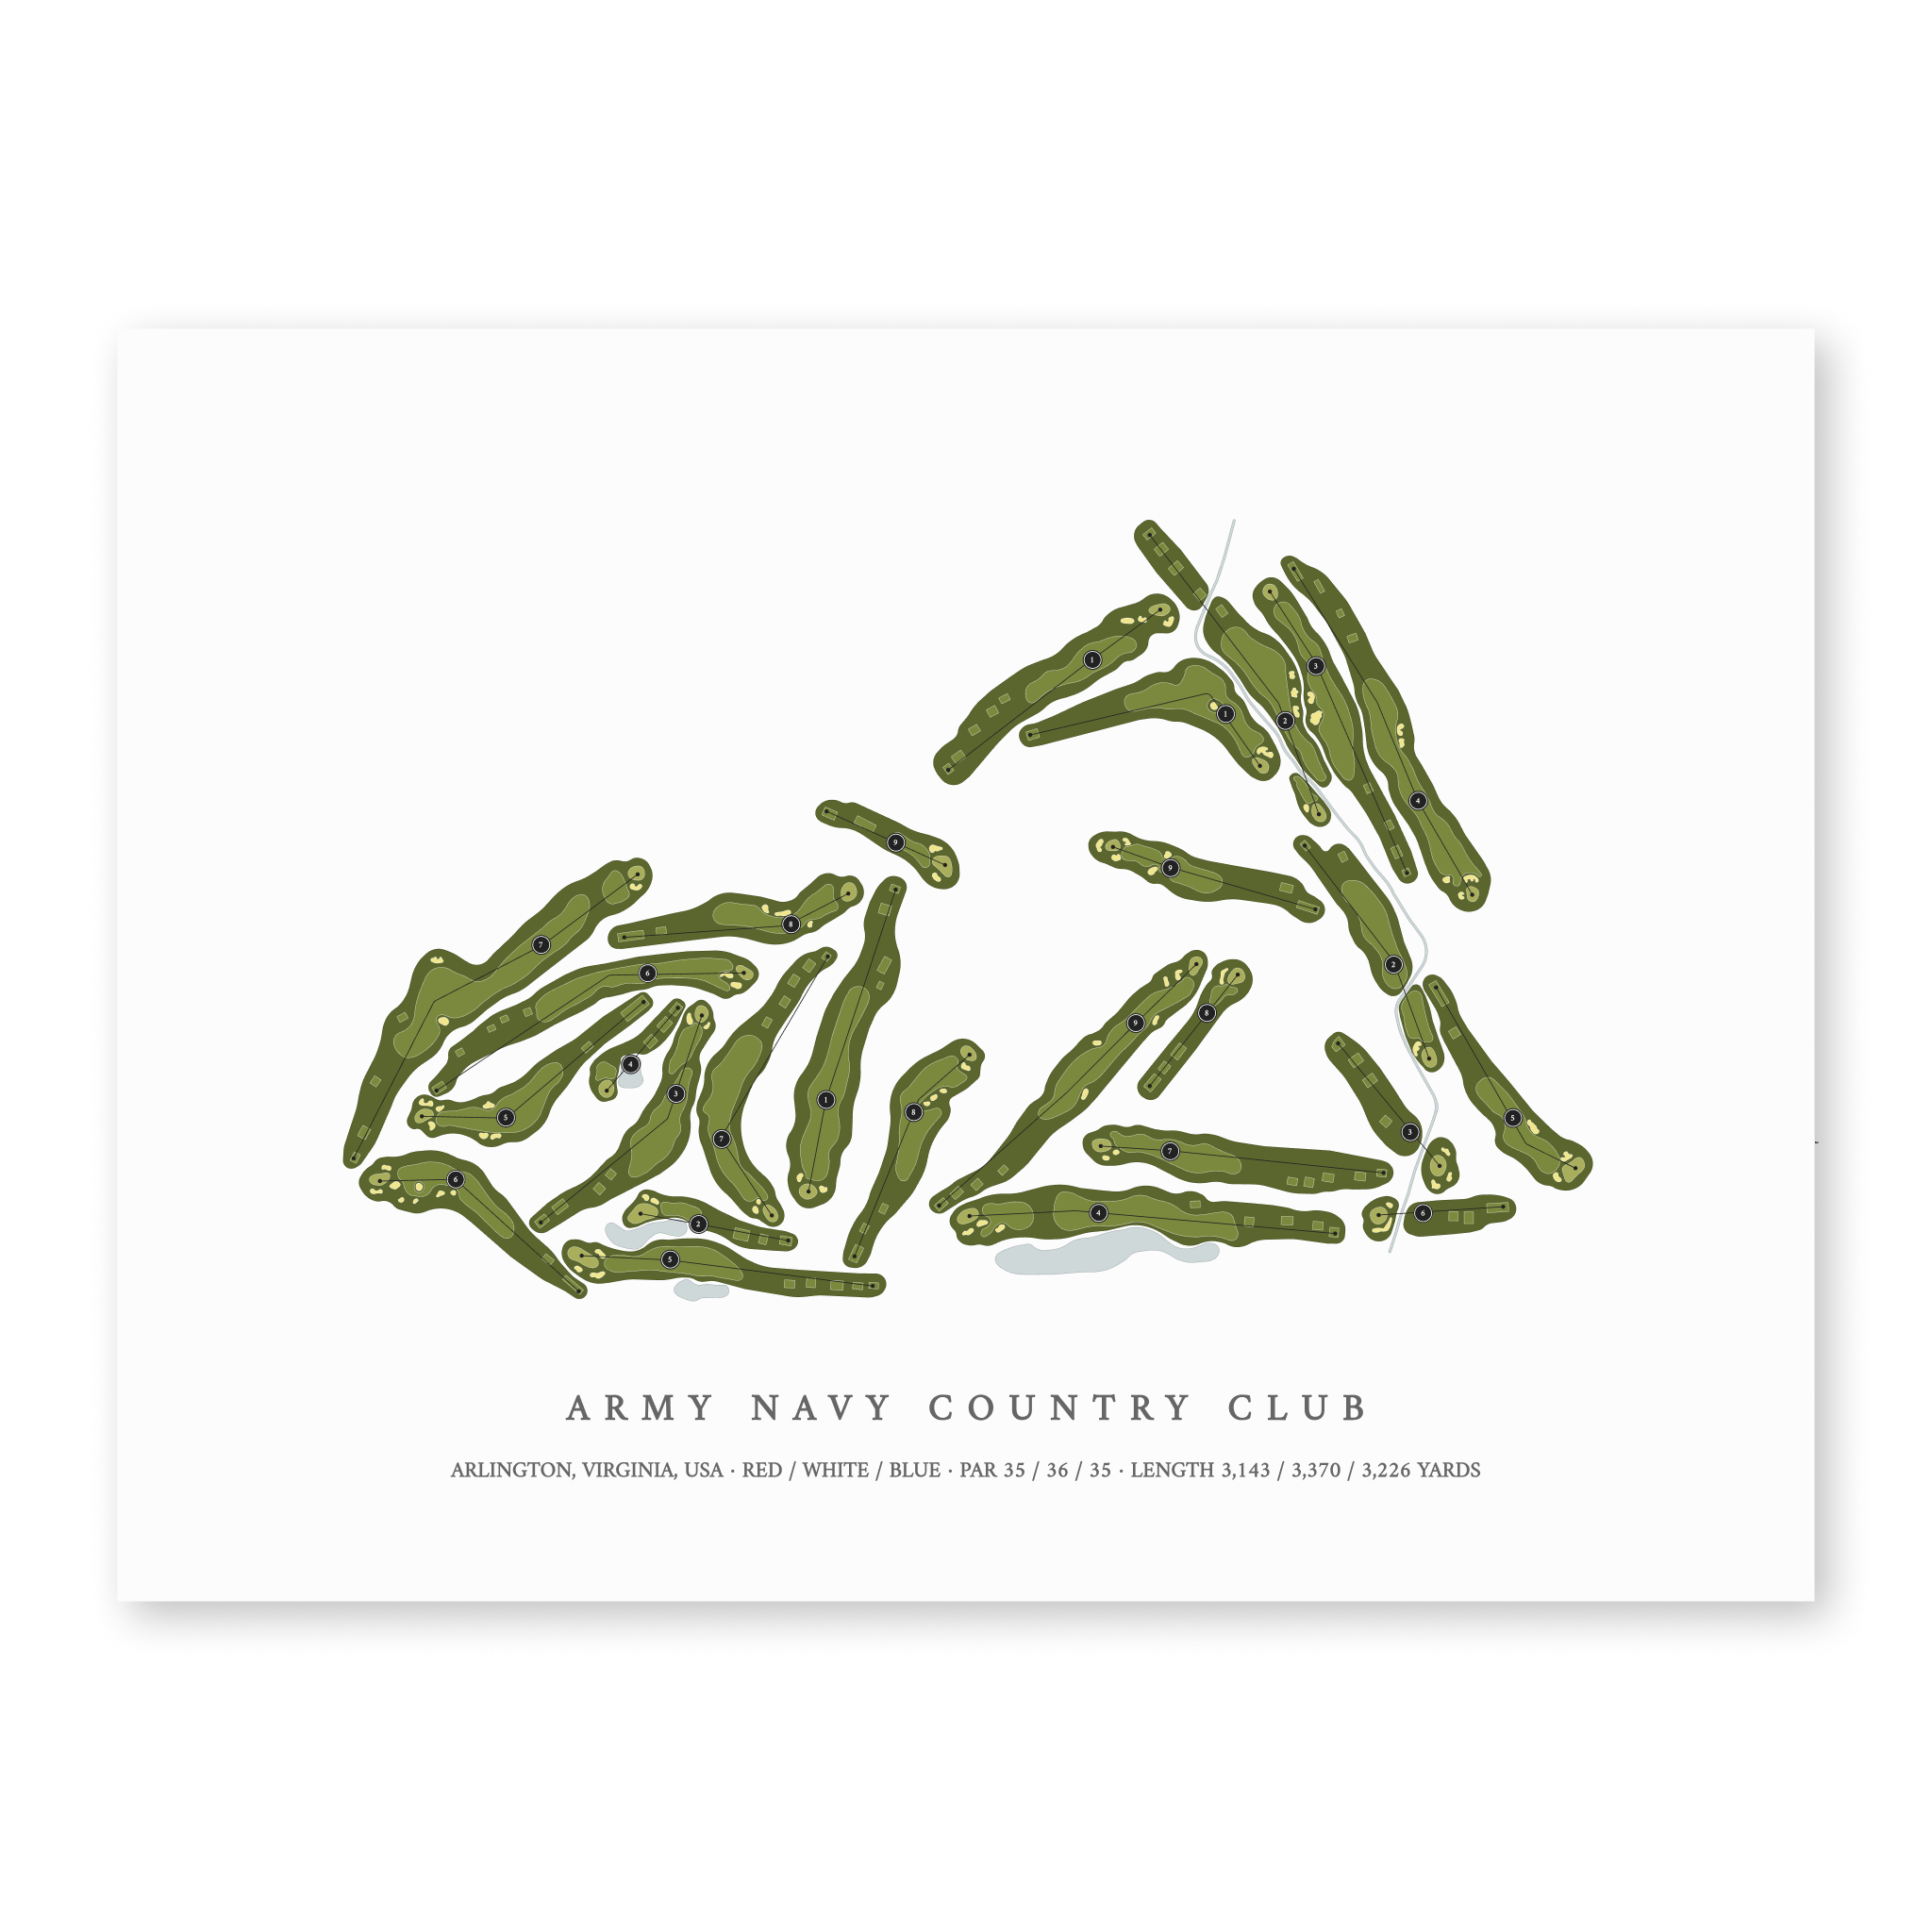 Army Navy Country Club| Golf Course Print | Unframed With Hole Numbers #hole numbers_yes